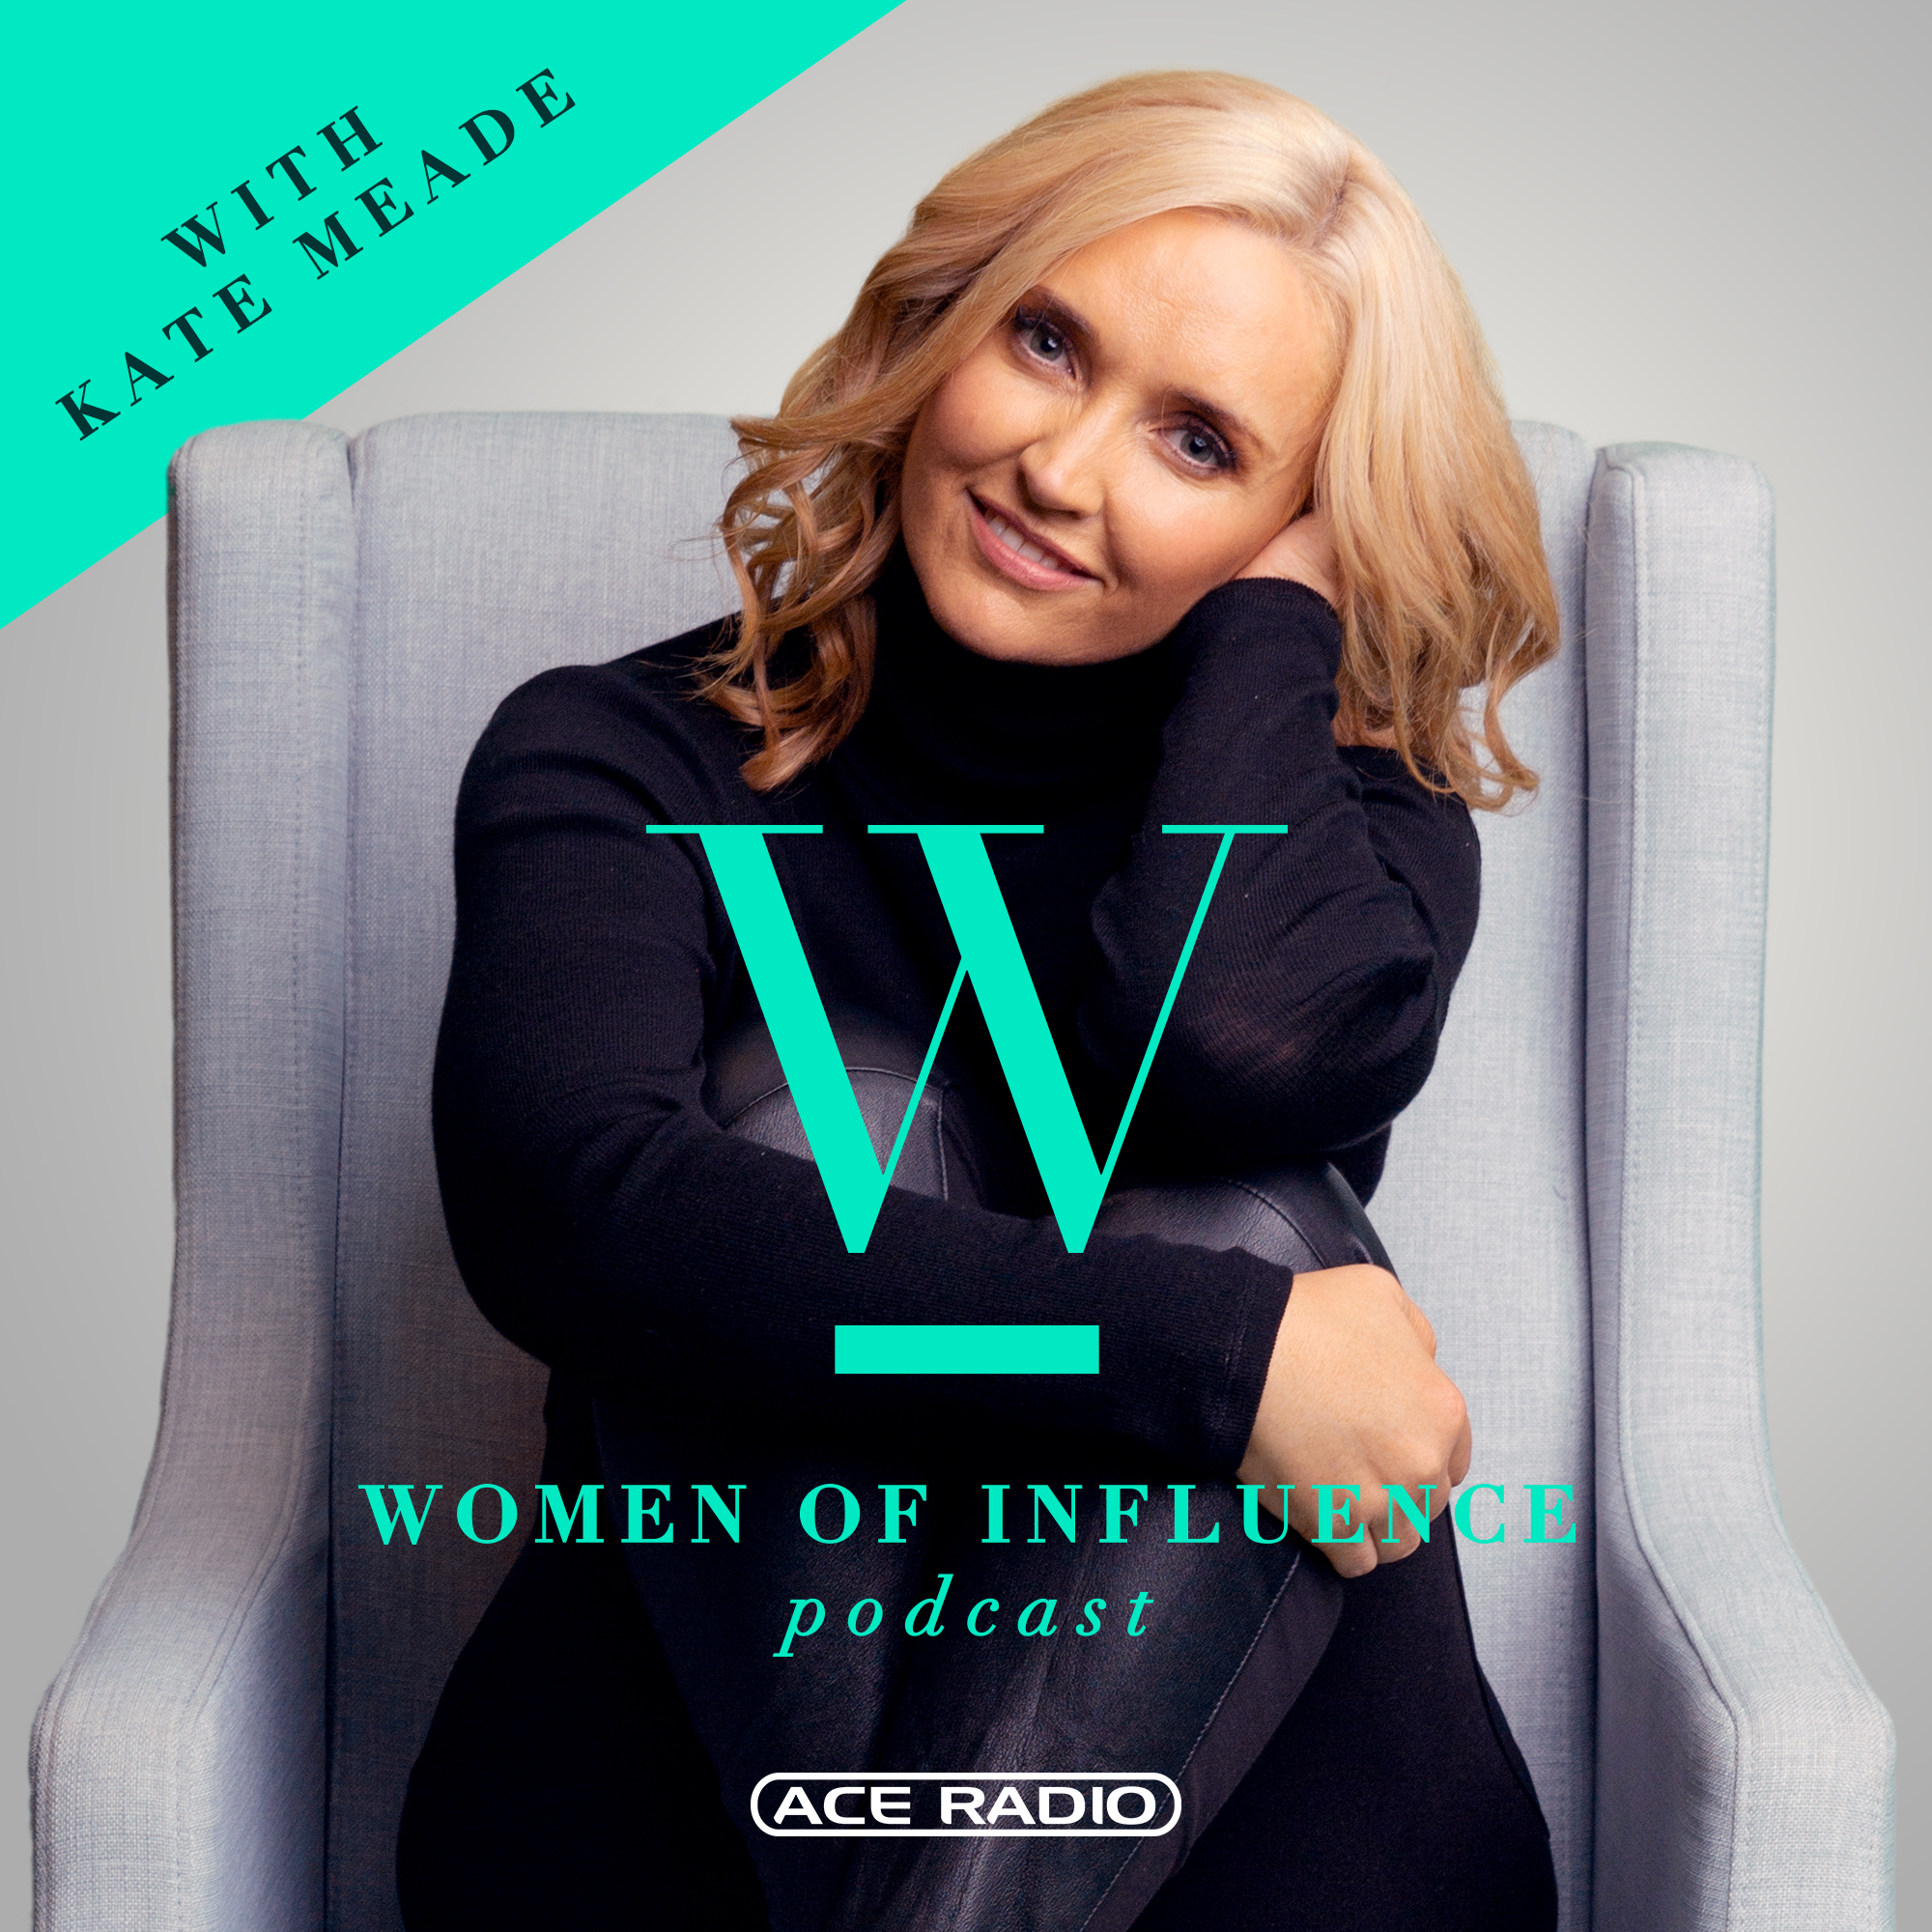 Women of Influence with Kate Meade